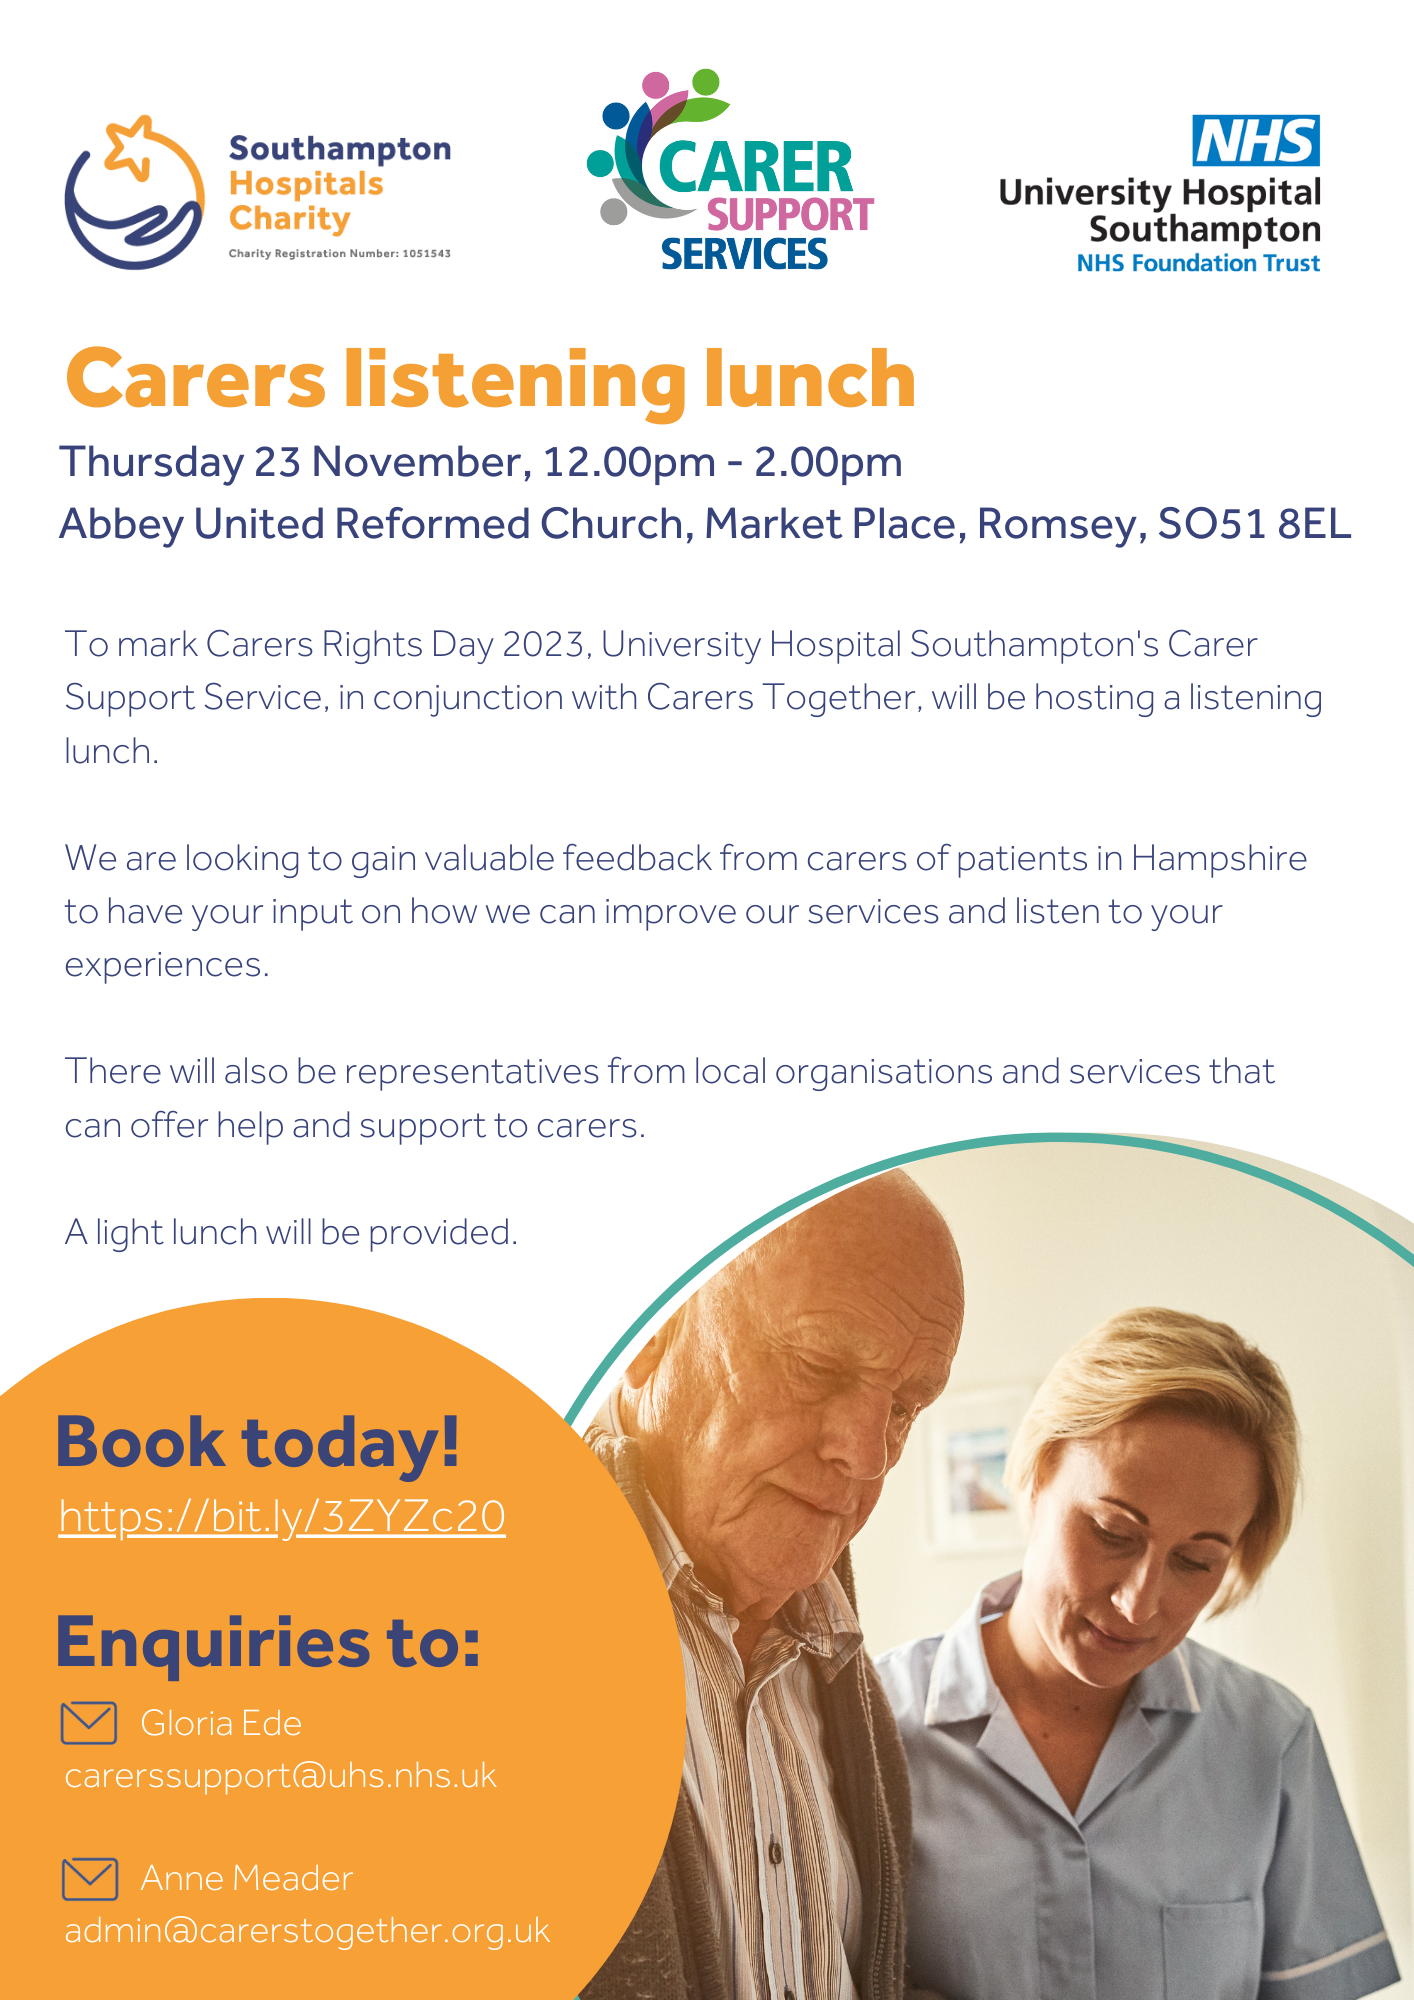 Carers listening lunch poster